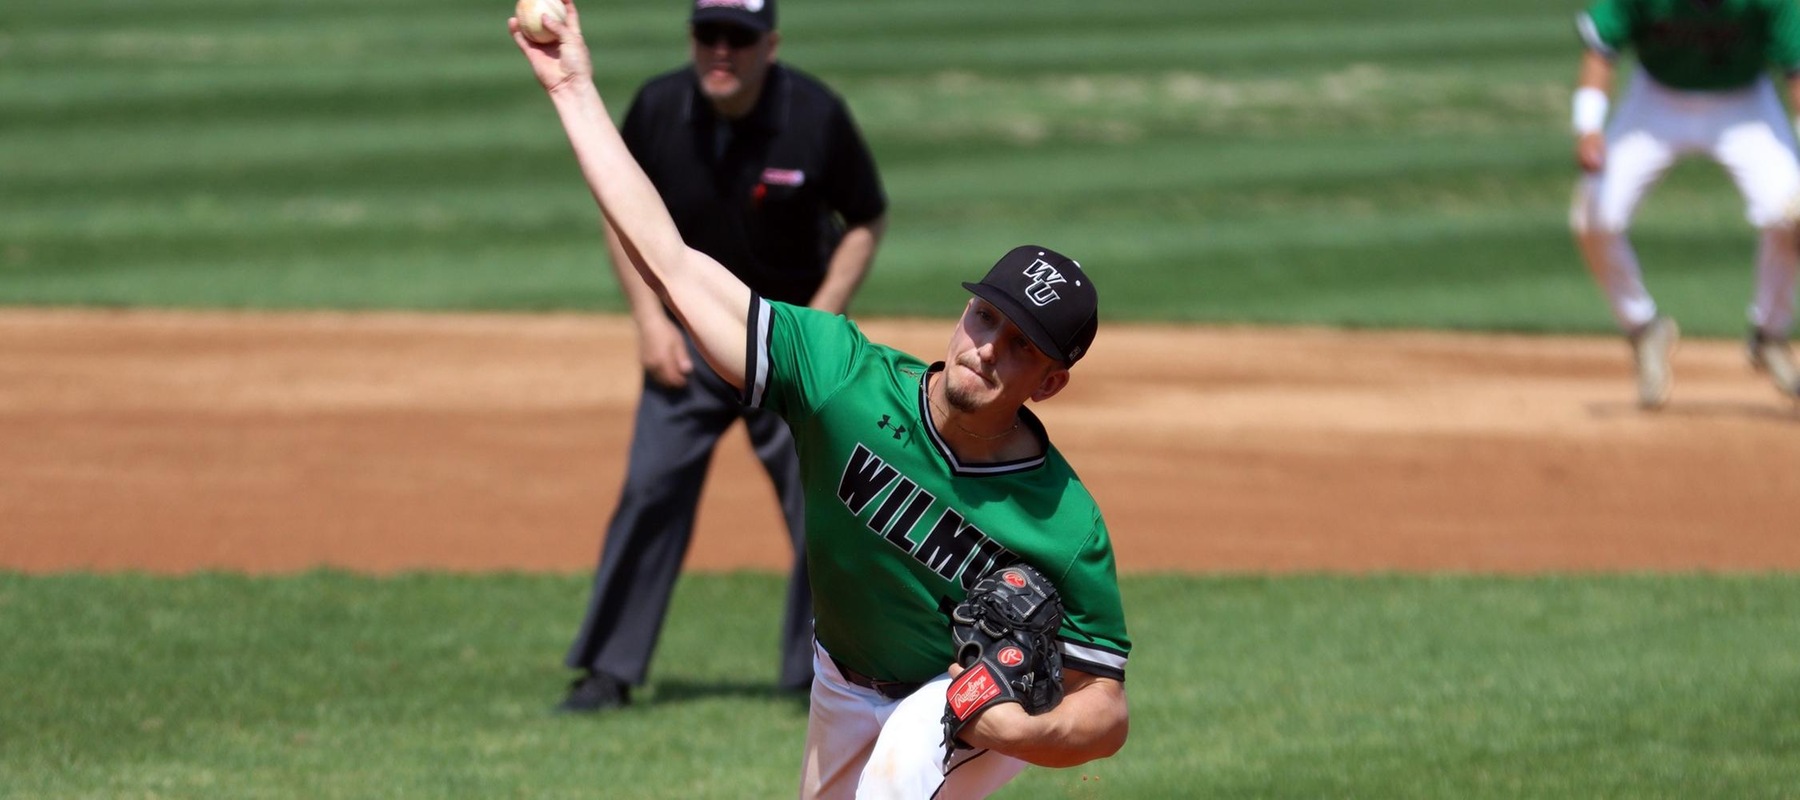 File photo of Matt Warrington who struck out 13 in a complete game shutout over Alliance. Copyright 2023; Wilmington University. All rights reserved. Photo by Dan Lauletta. April 5, 2023 vs. Bloomfield.